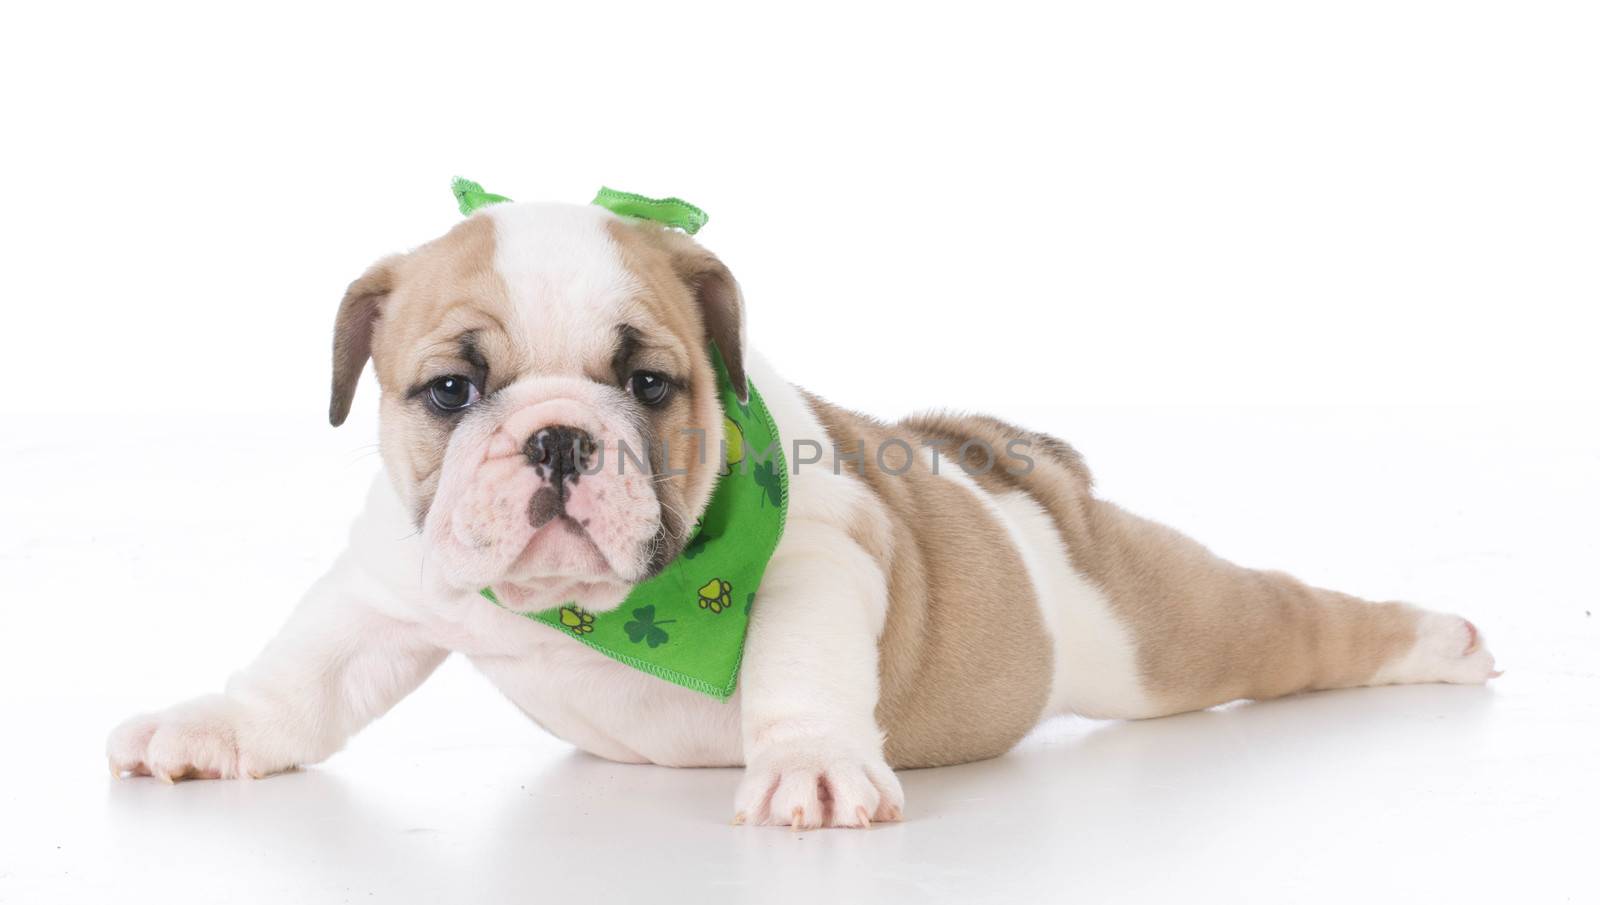 seven week old english bulldog puppy isolated on white background